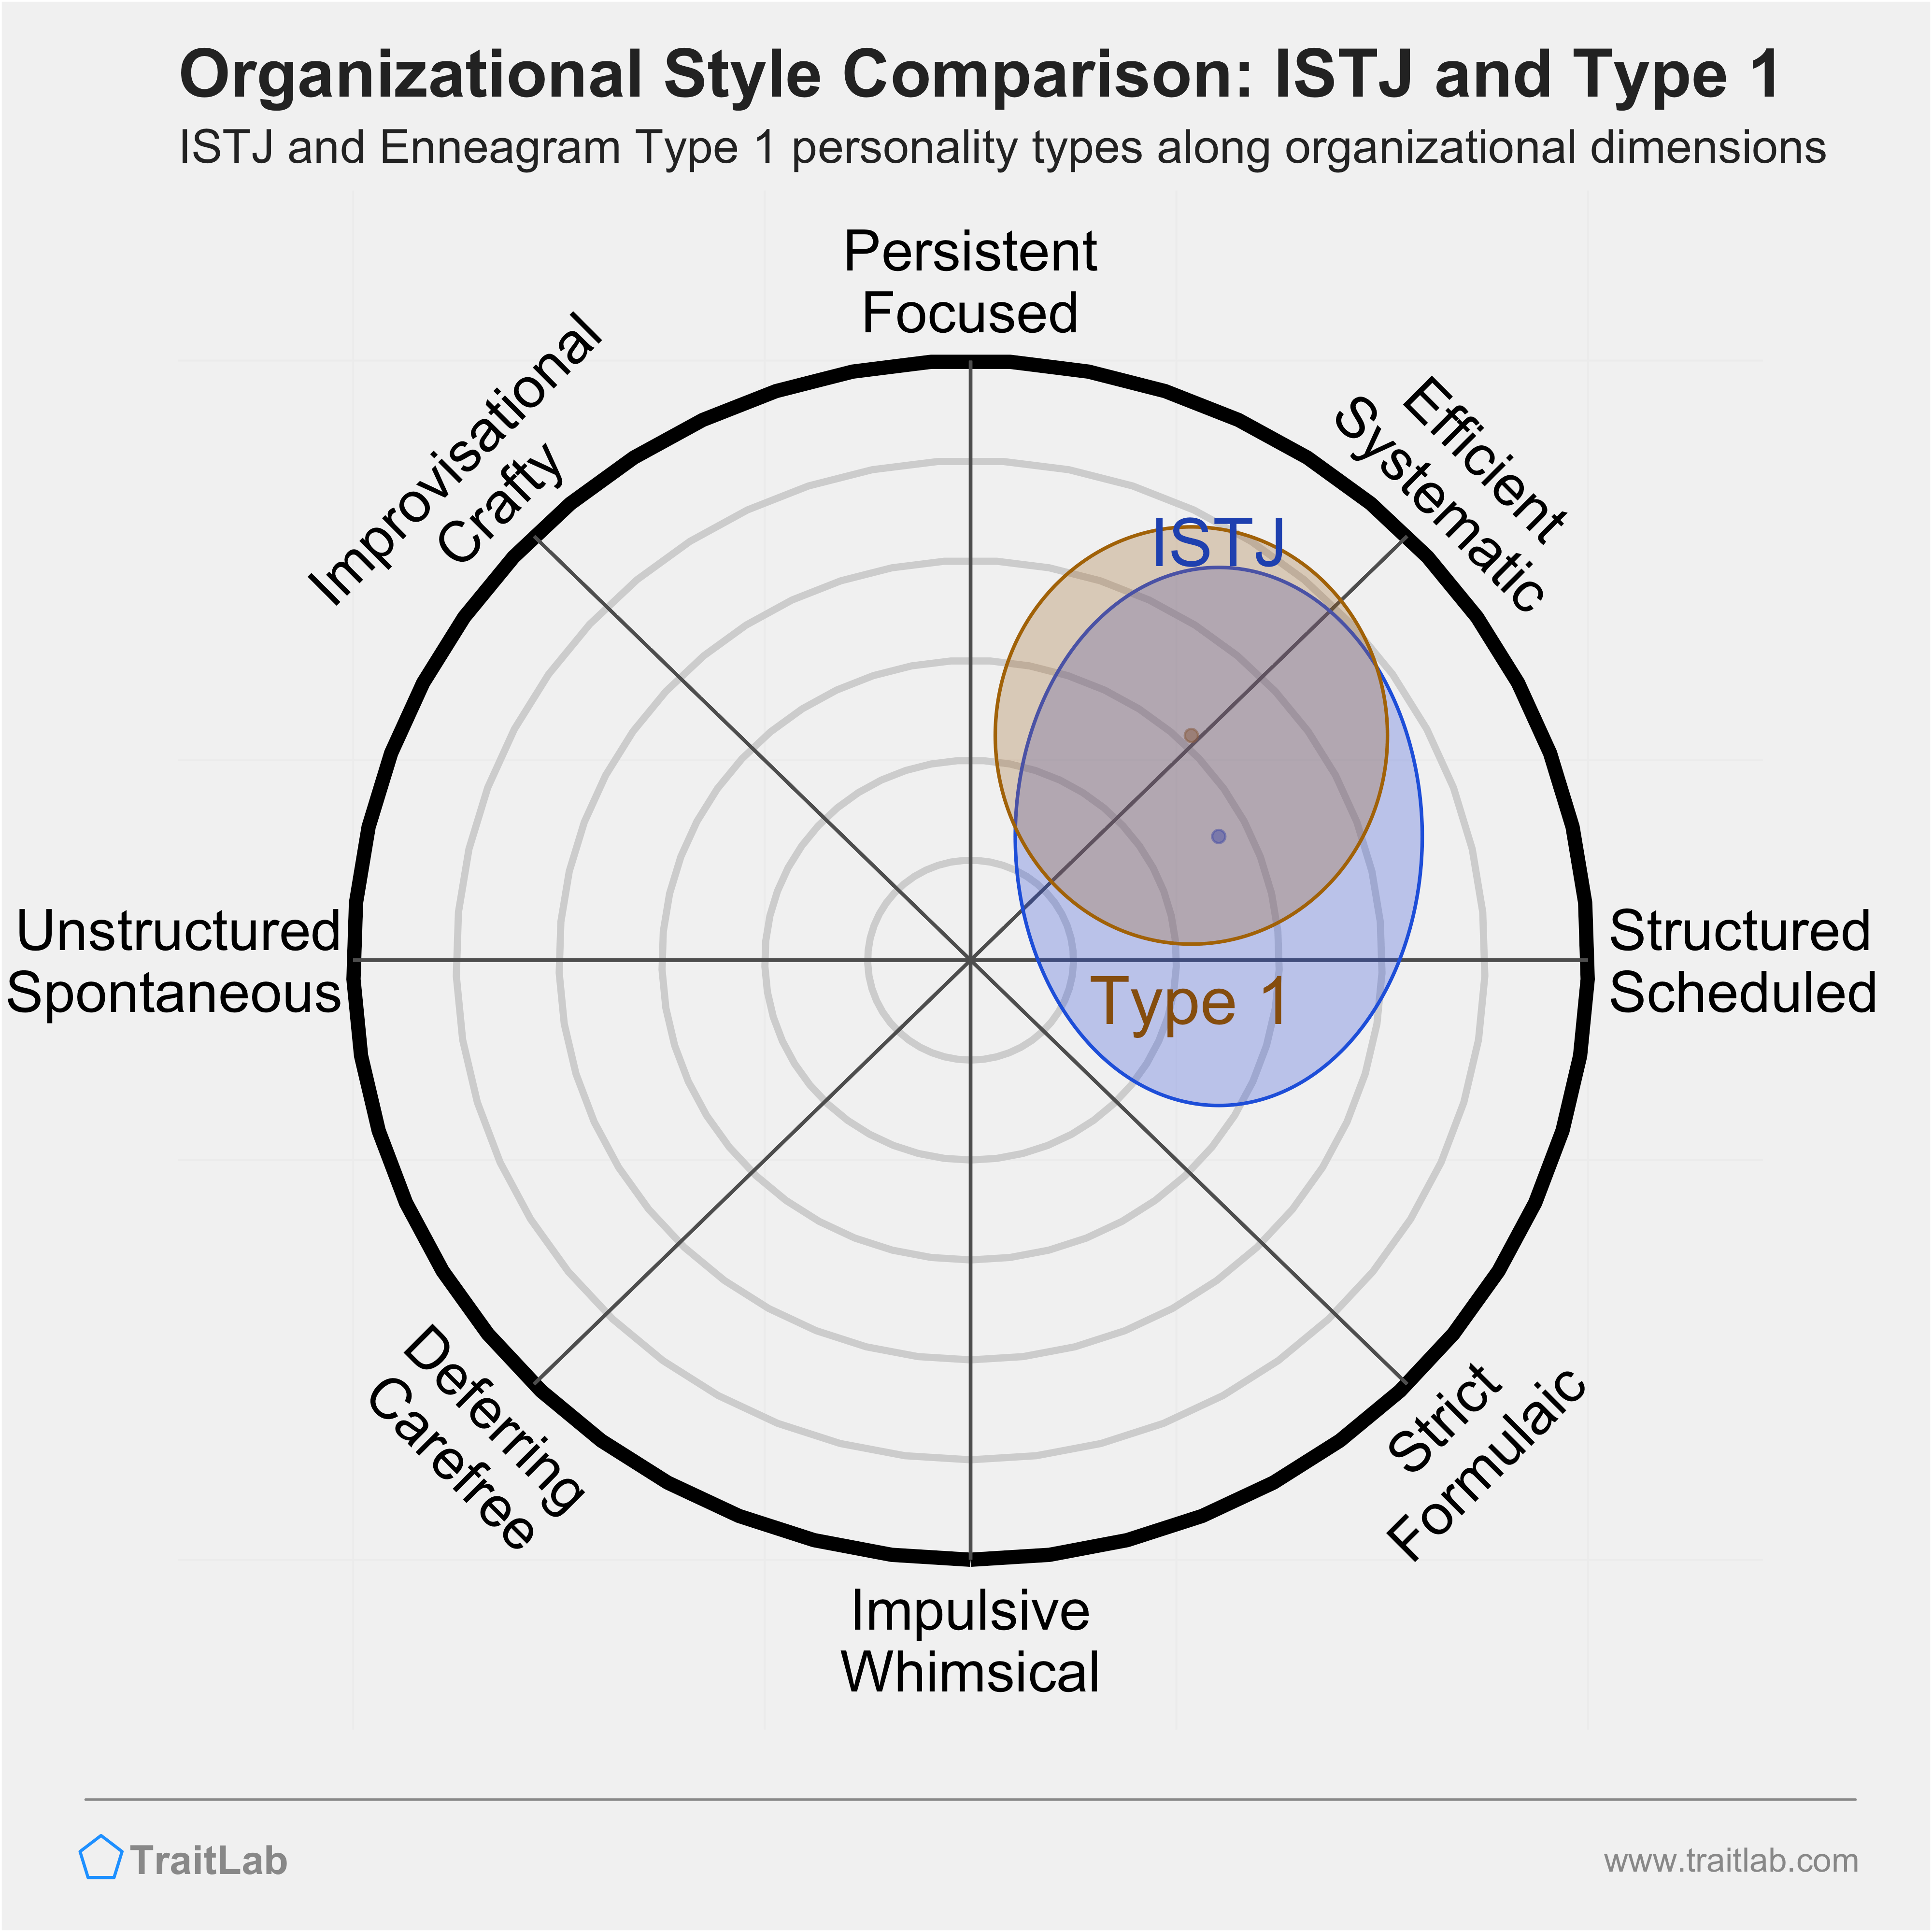 ISTJ and Type 1 comparison across organizational dimensions